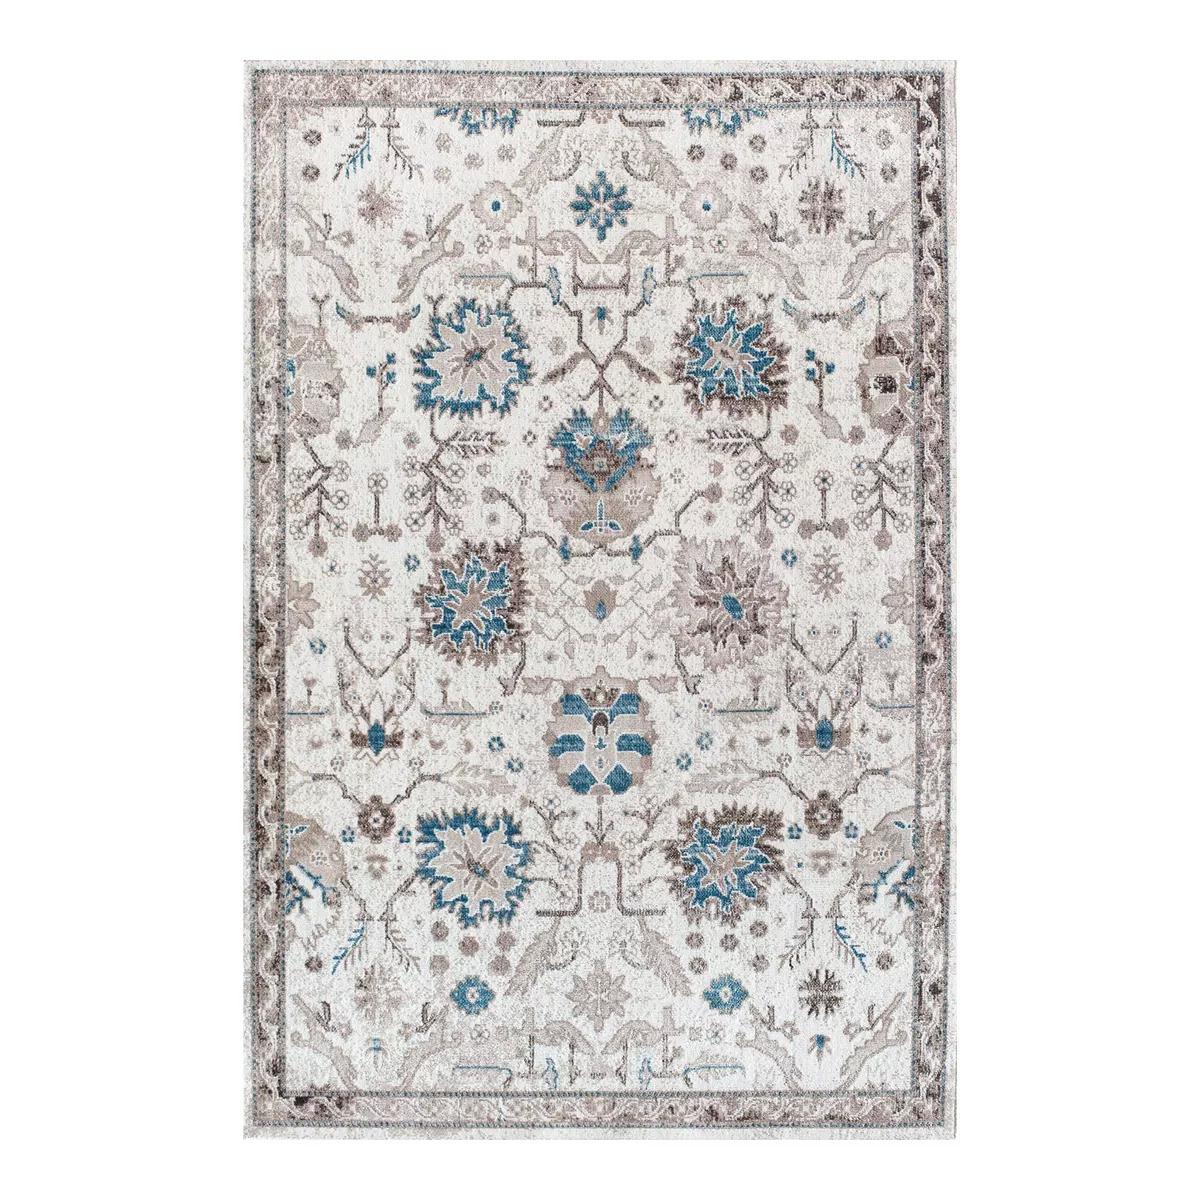 5 x 7 Rugs America Area Rug for $33.59